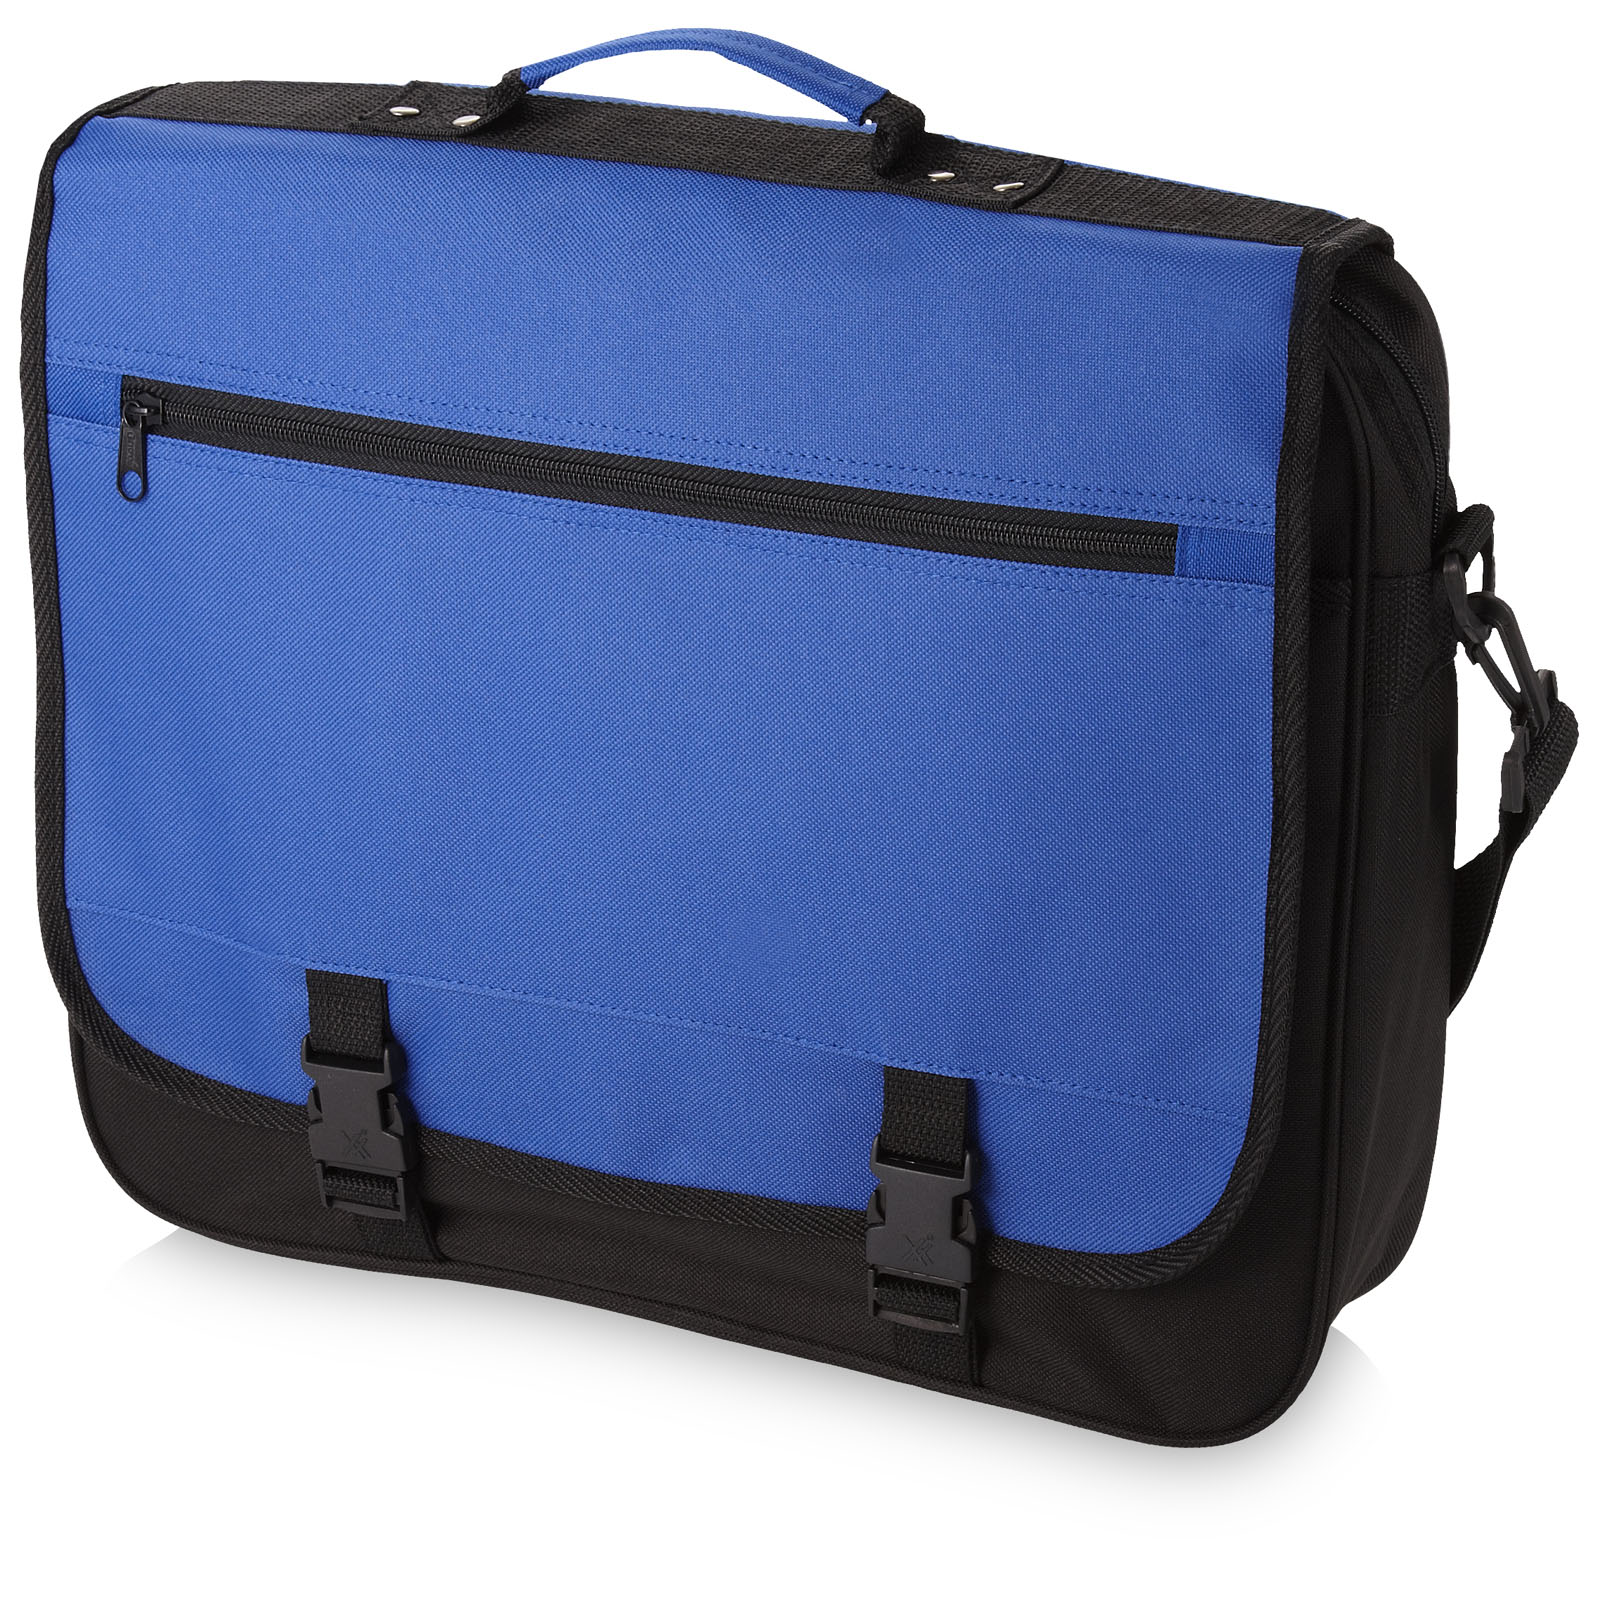 Conference bags - Anchorage conference bag 11L